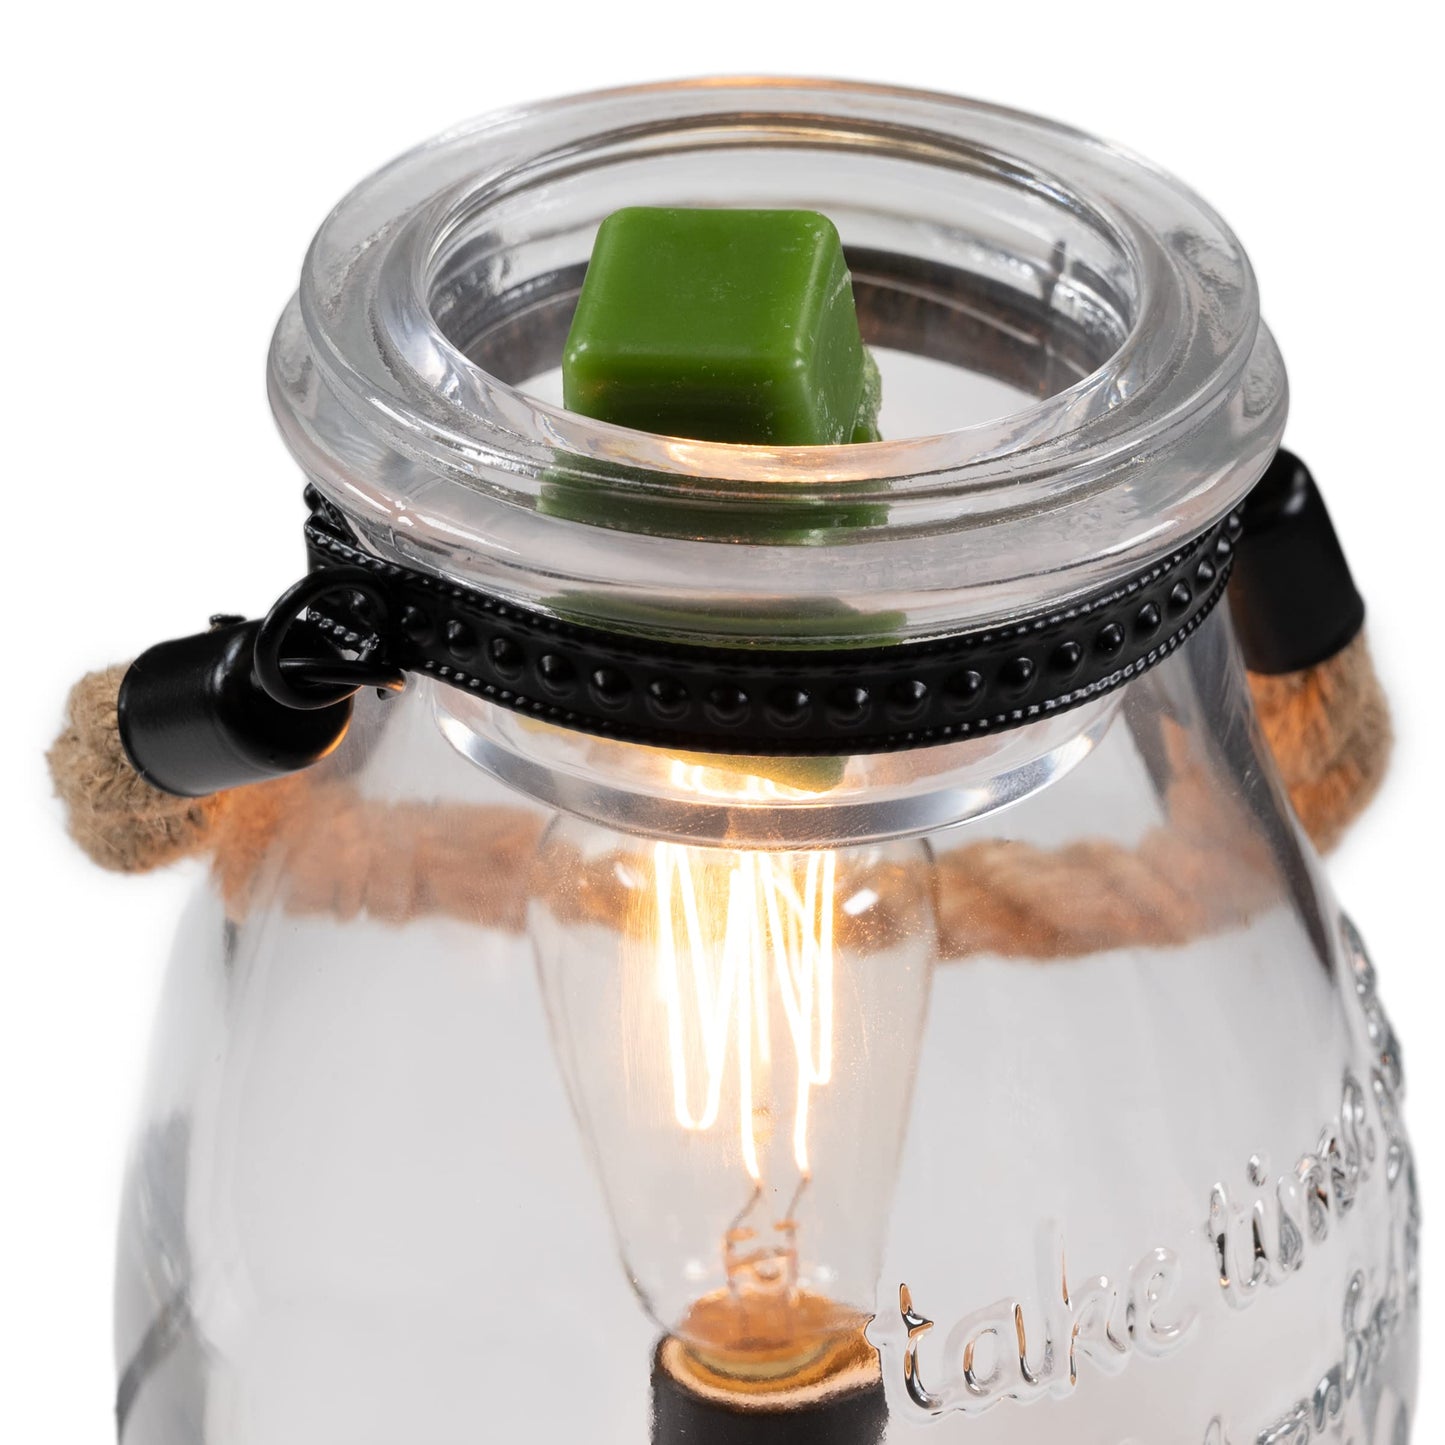 Scentsationals Makaylabe Edison Lantern Wax Warmer 40w Bulb Air Freshener - Scented Electric Warmer - Fragrance Home Decor Wickless Candle Safe Clean Heat Source